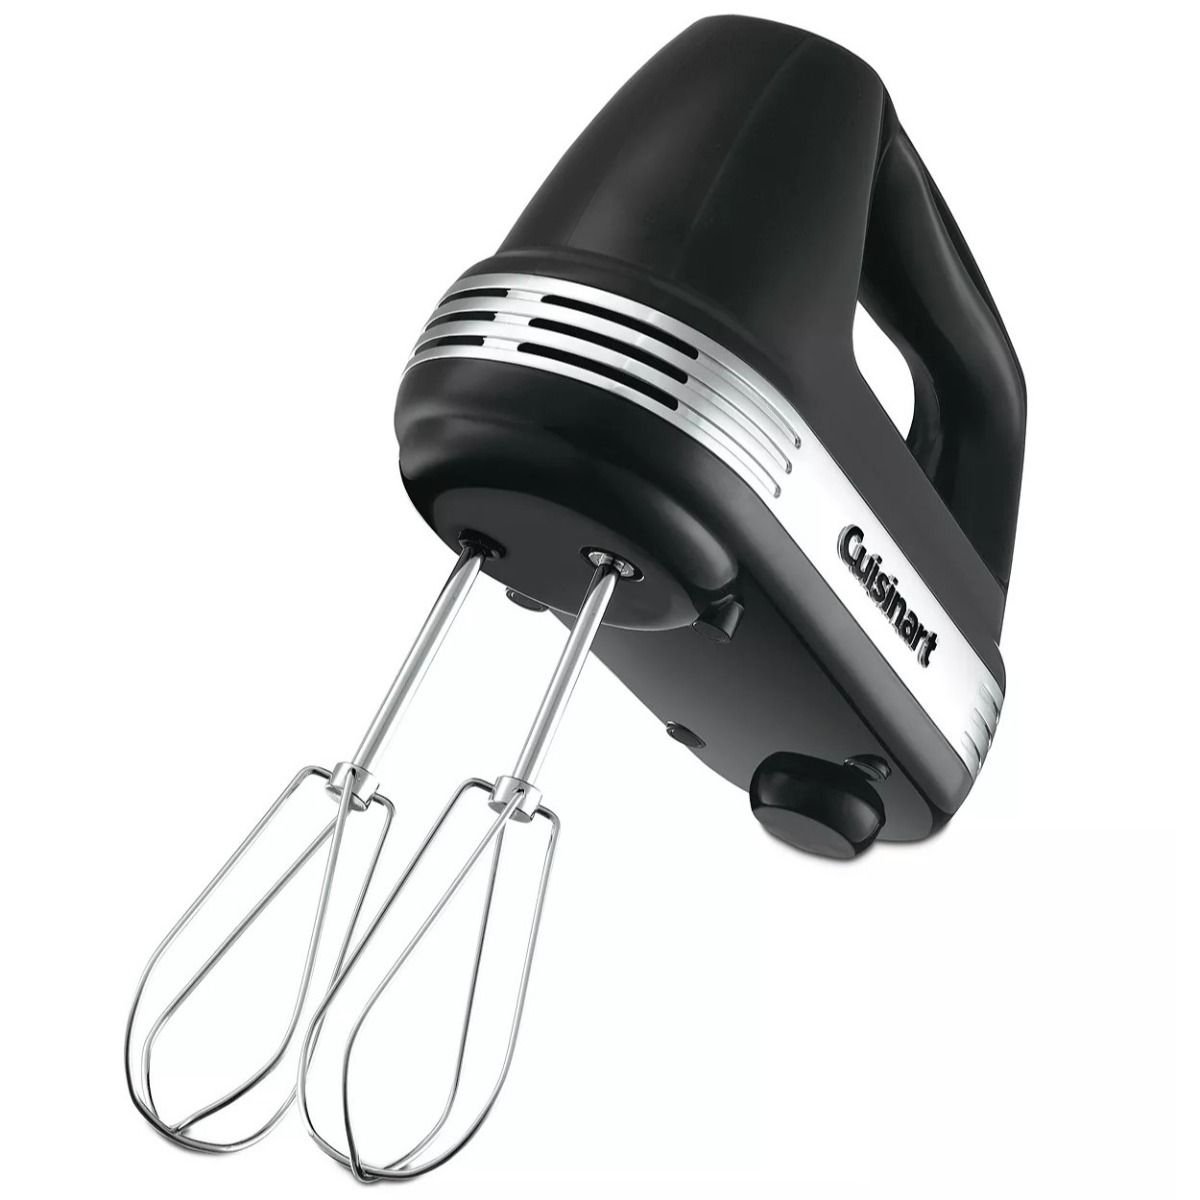 BLACK+DECKER 2-in-1 Pedestal Hand Mixer with Rotating Bowl, Black 